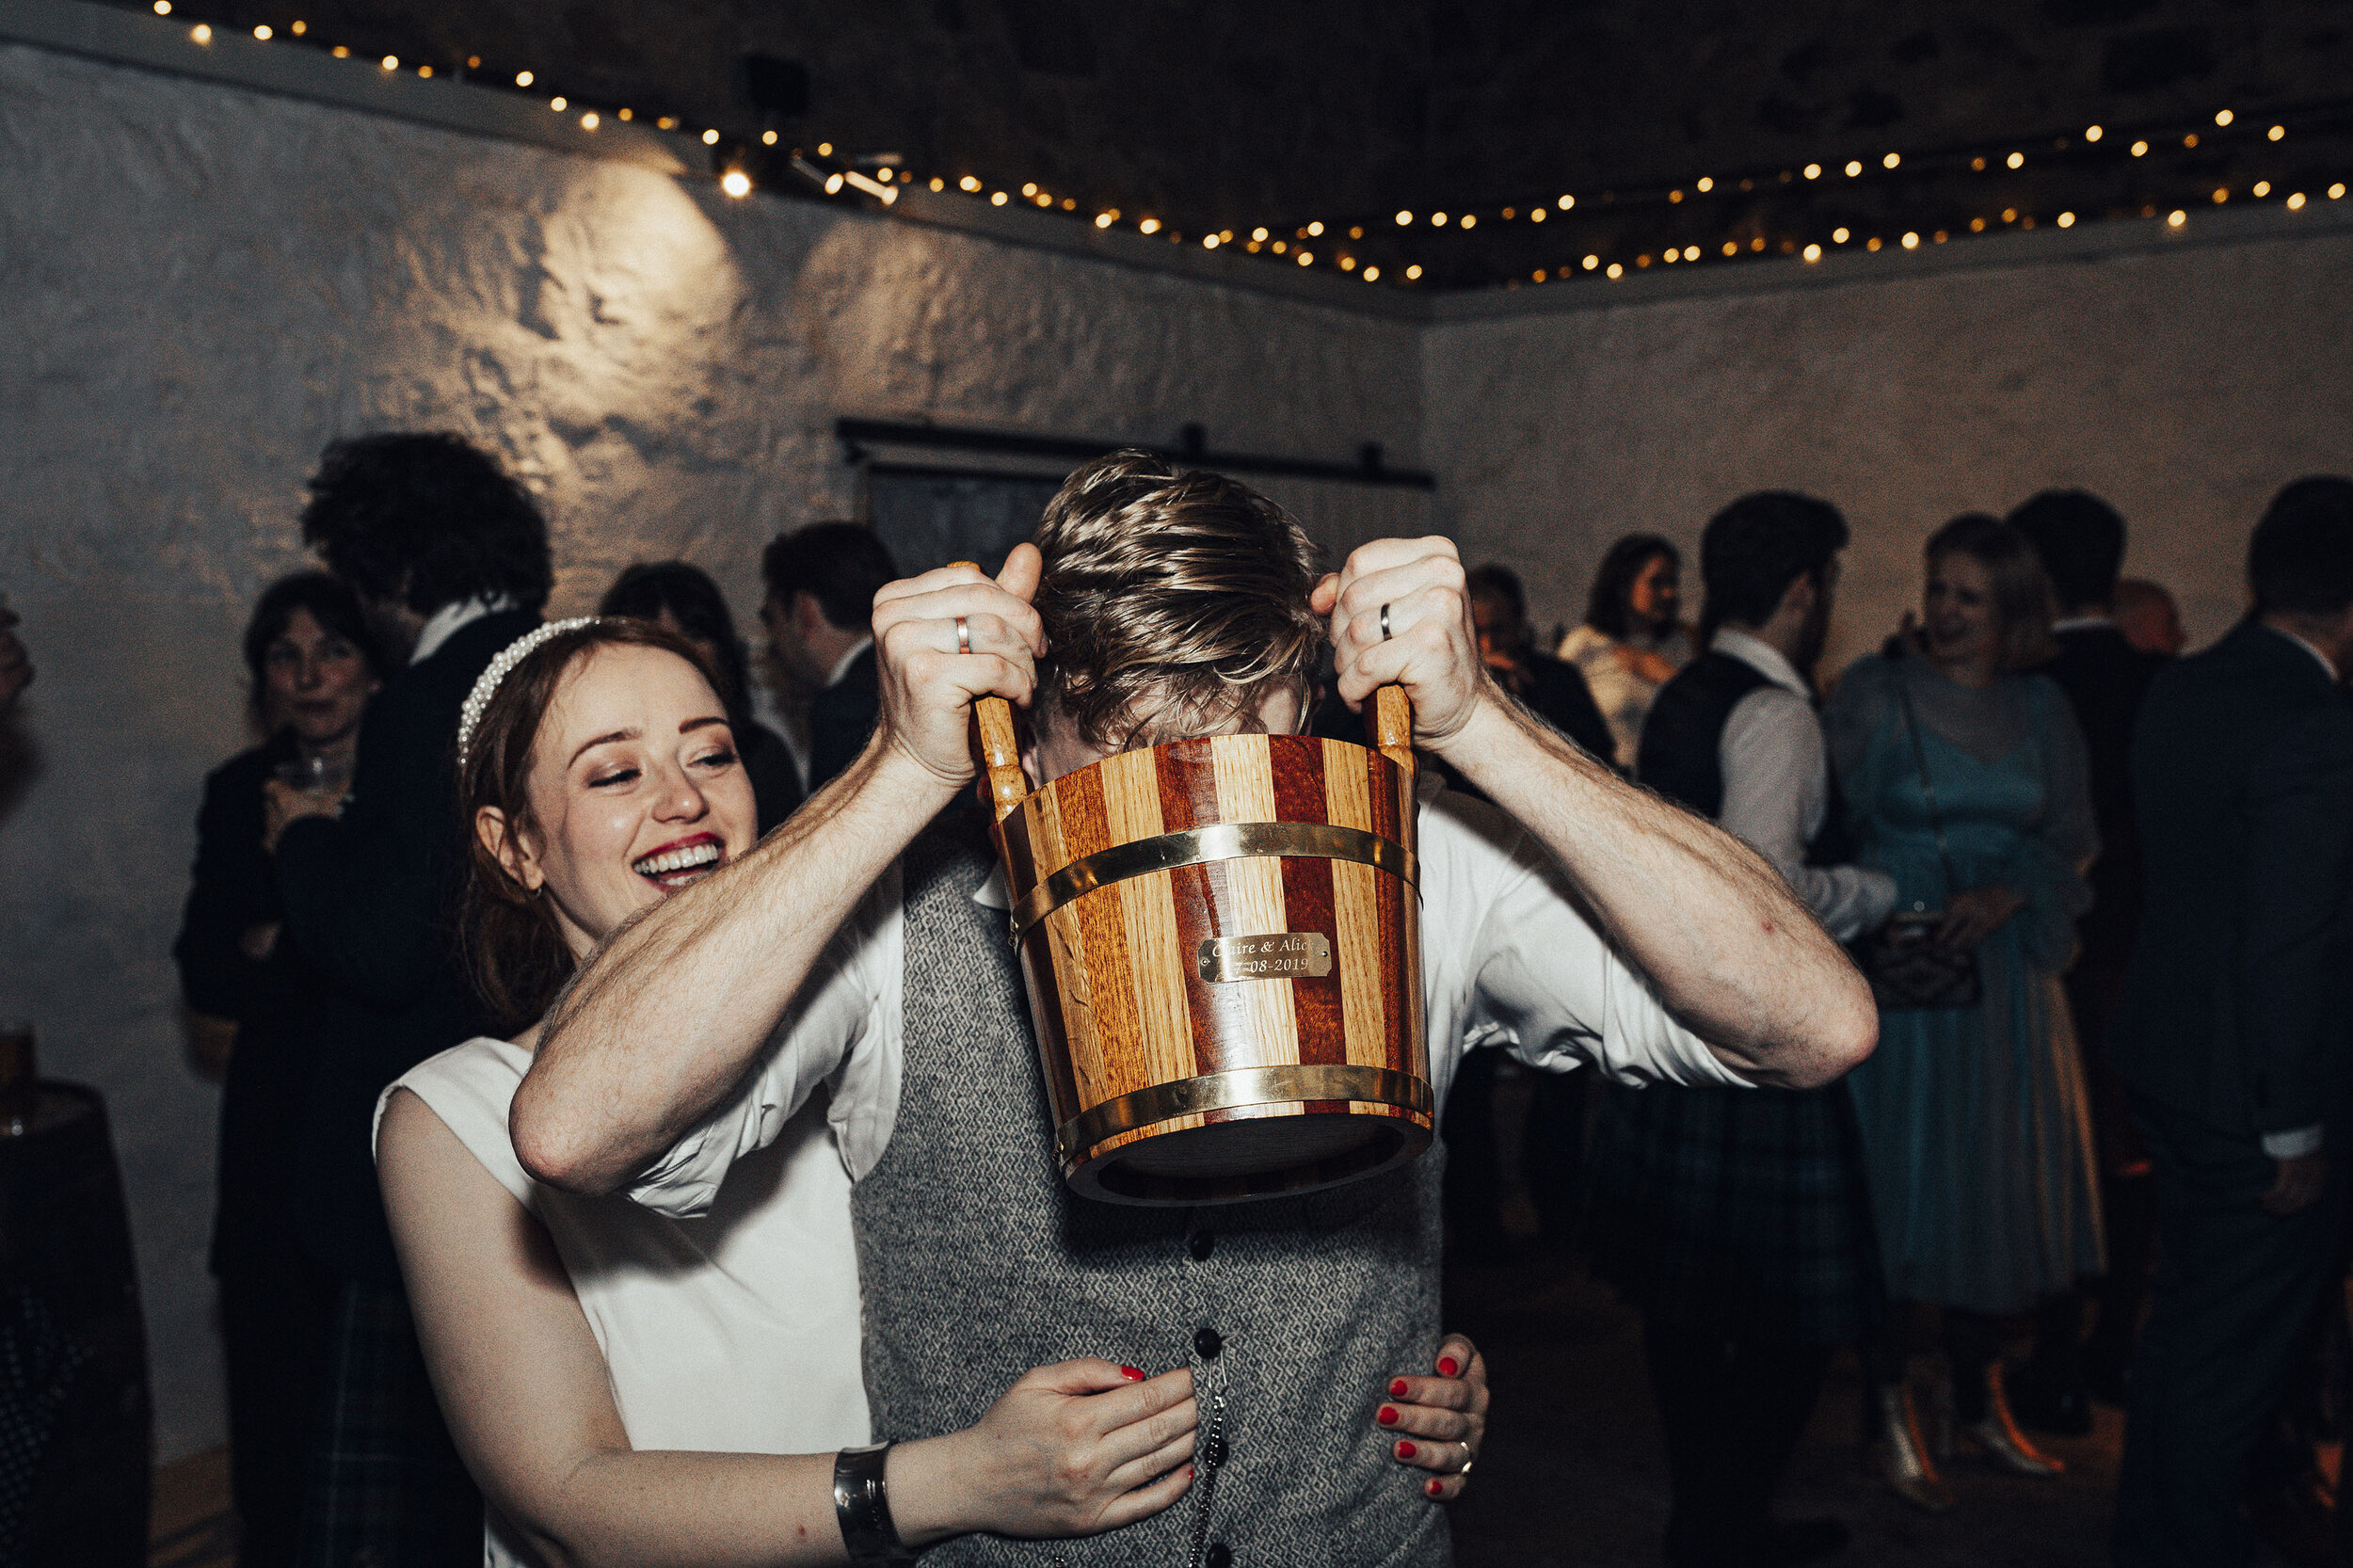 COW_SHED_CRAIL_WEDDING_PJ_PHILLIPS_PHOTOGRAPHY_173.jpg